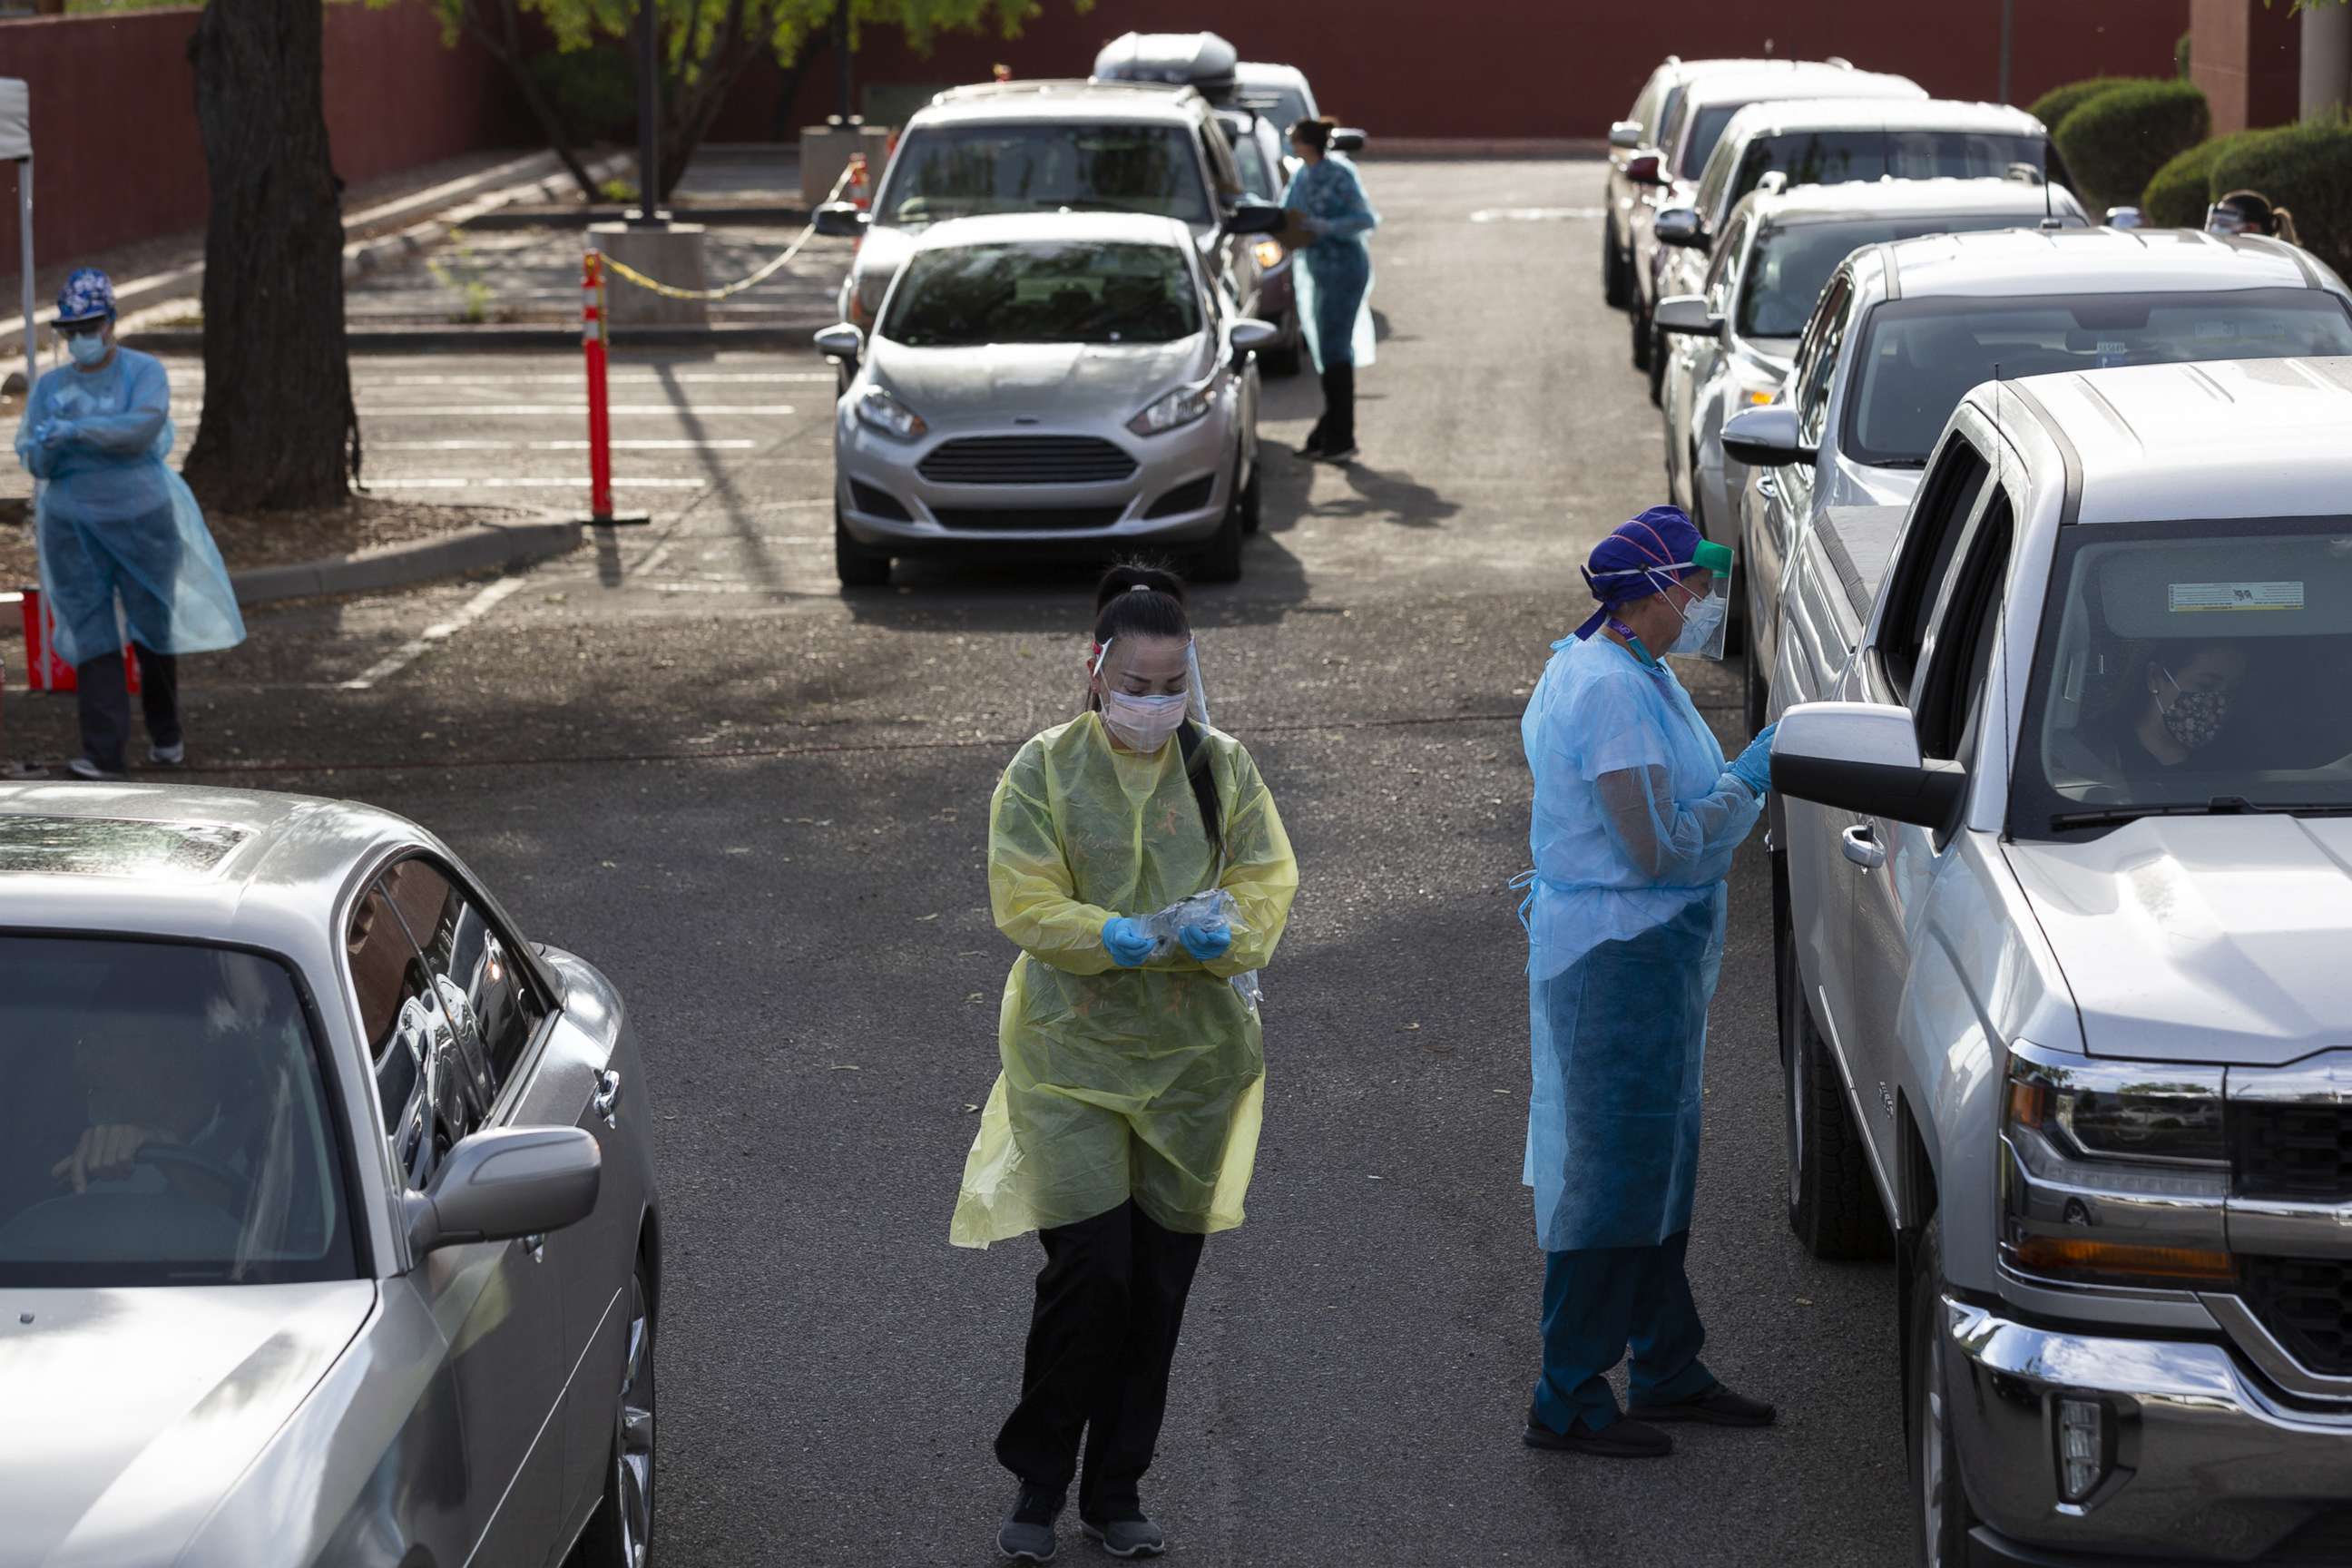 PHOTO: Healthcare workers wearing personal protective equipment (PPE) administer tests at an El Rio Health Covid-19 drive-thru testing site in Tucson, Ariz., July 13, 2020.